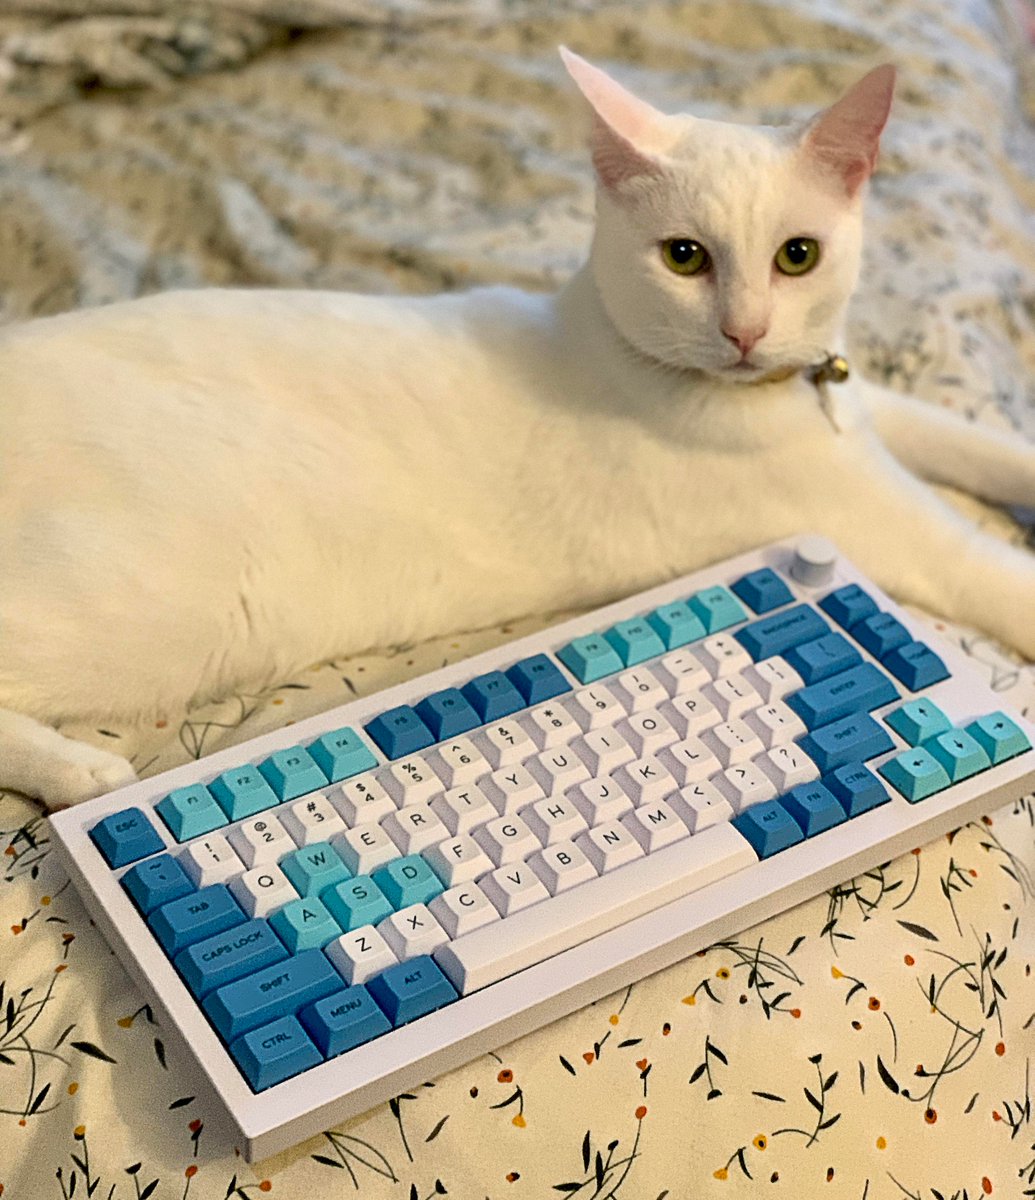 Keychron Q1 topped with an elegant kitten. ⚠️Alert: This is custom-made, so we don't scale. 😔 📸by u/thtoneaznguy (reddit) #KeychronQ1 #Keychron #customkeyboard #mechanicalkeyboard #wirelesskeyboard #keyboard #kittech